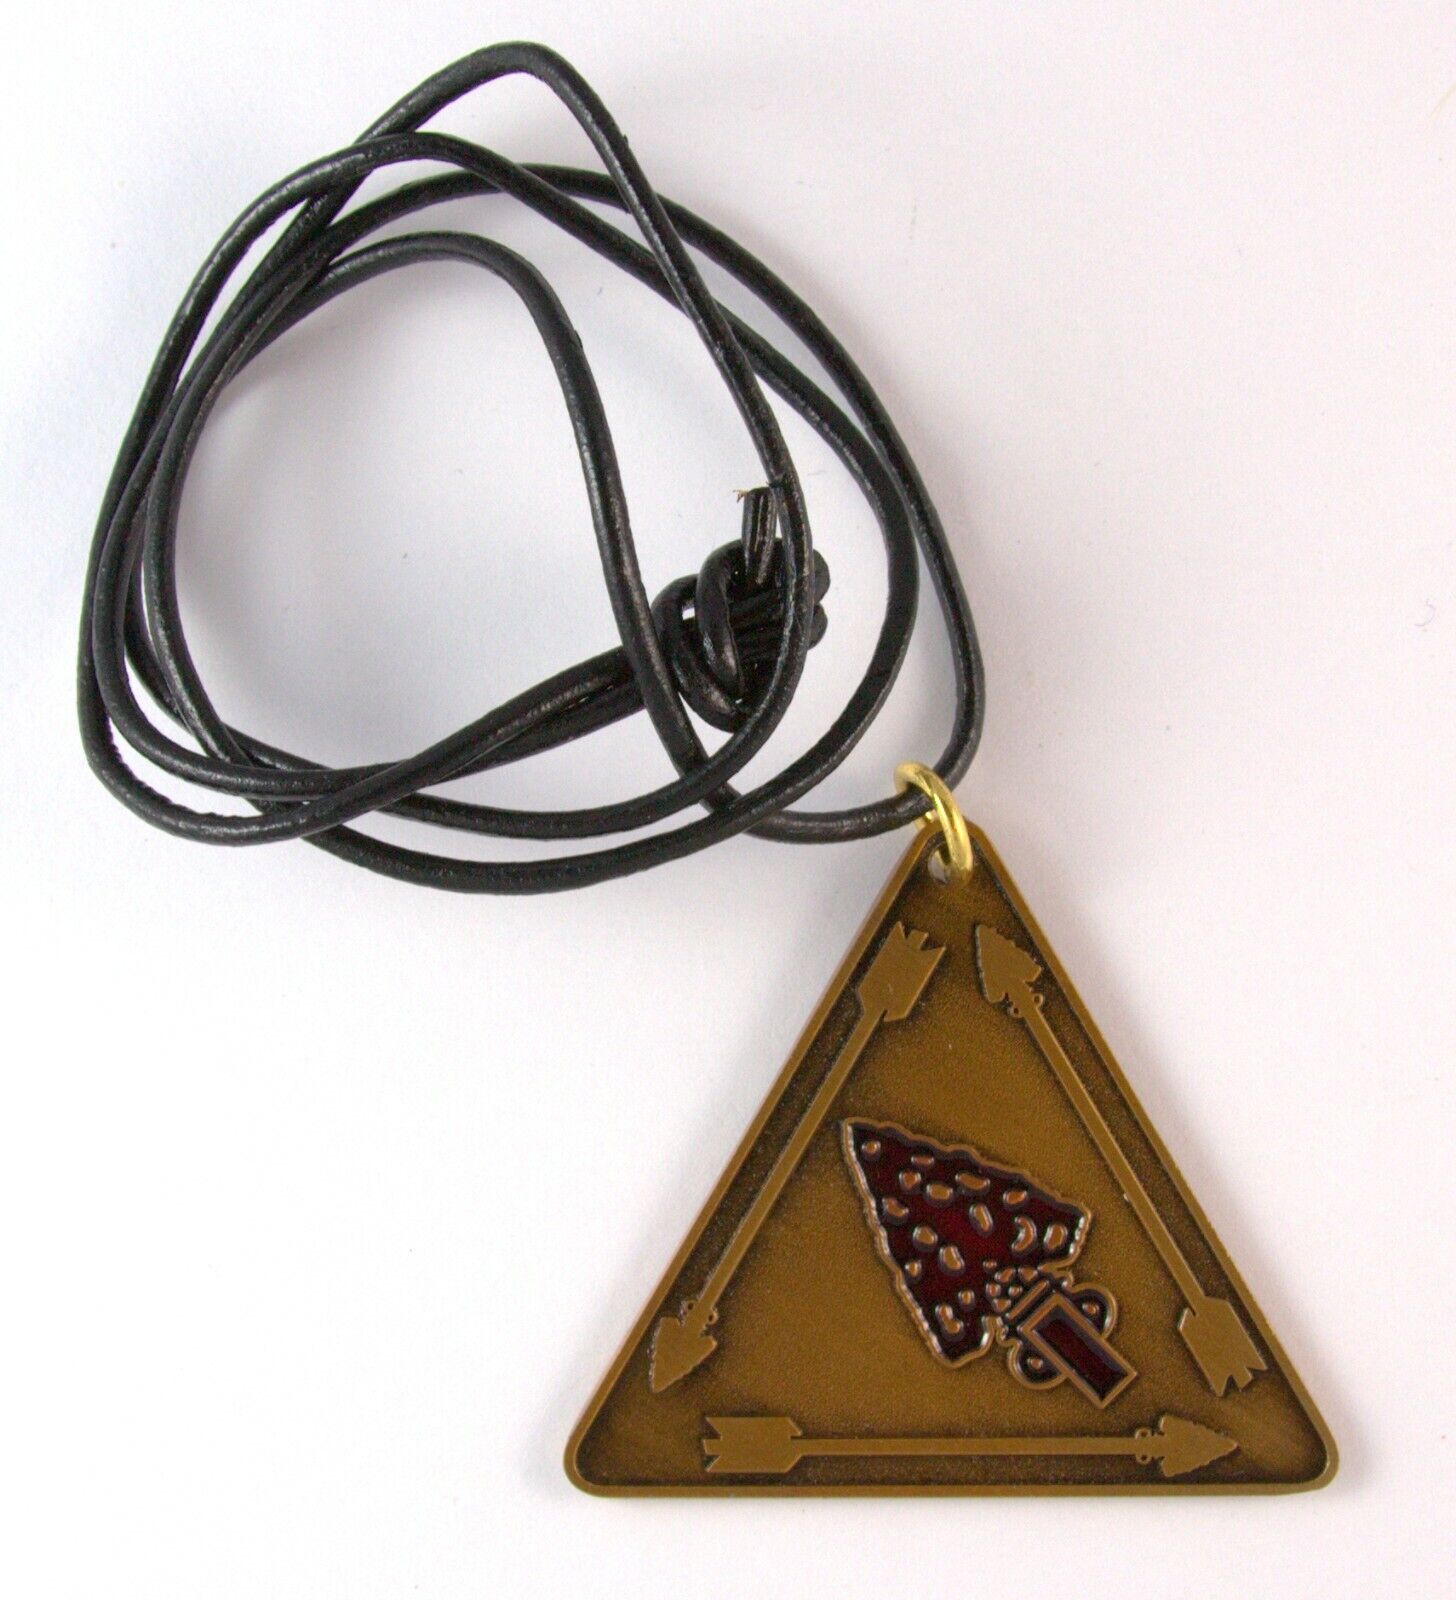 Order of the Arrow OA Vigil Honor Pendant Necklace (WWW on back)